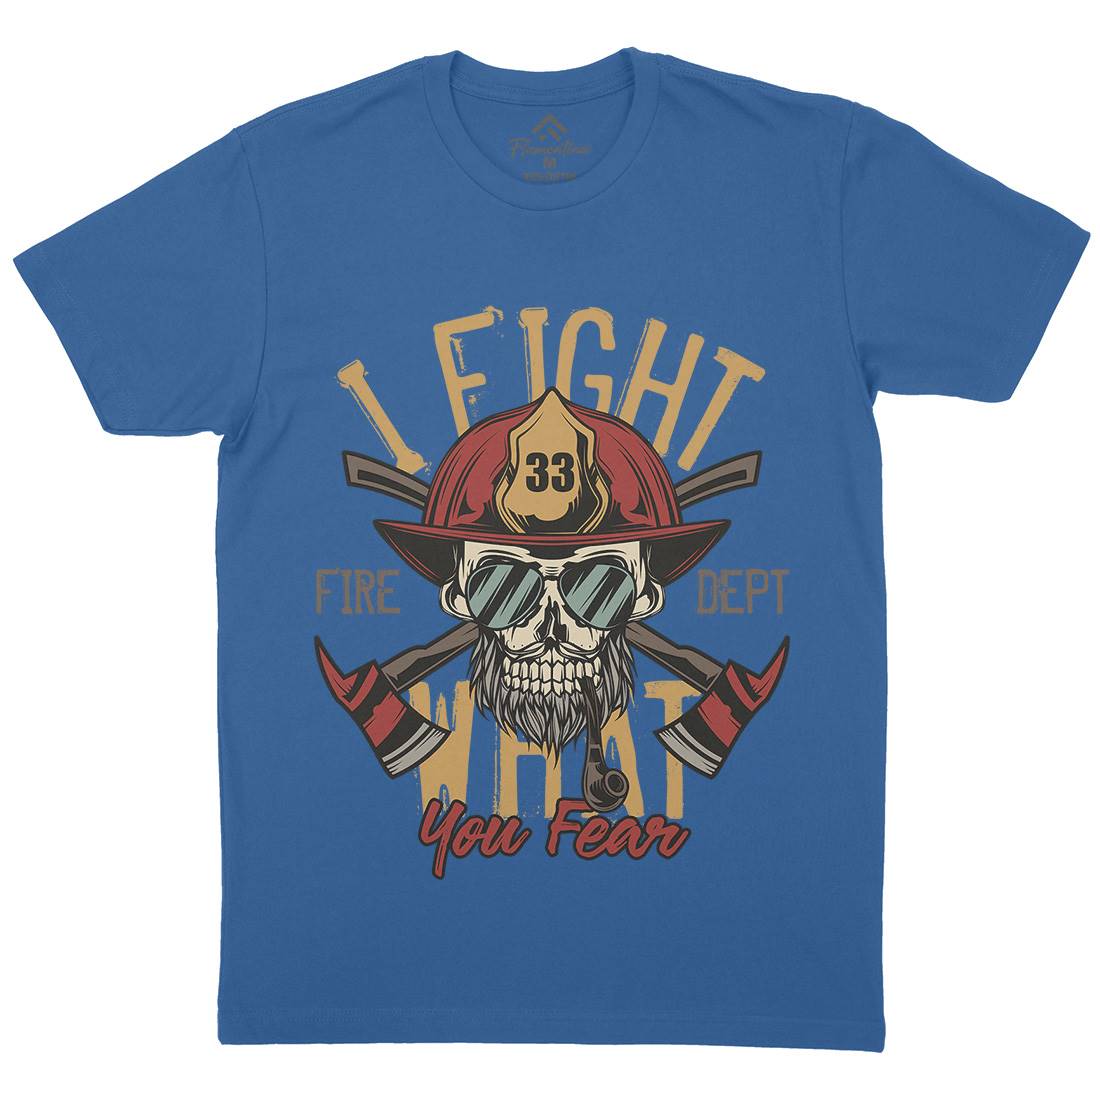 I Fight Mens Crew Neck T-Shirt Firefighters C830